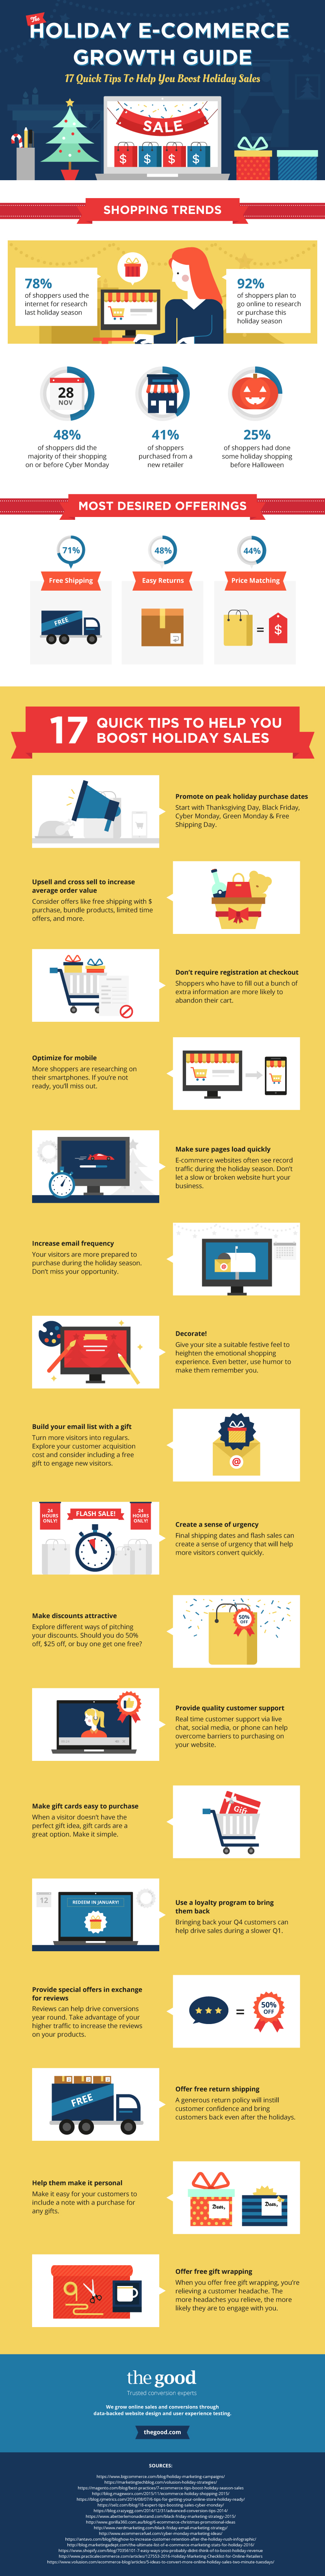 Infographic for The Holiday E-Commerce Growth Guide